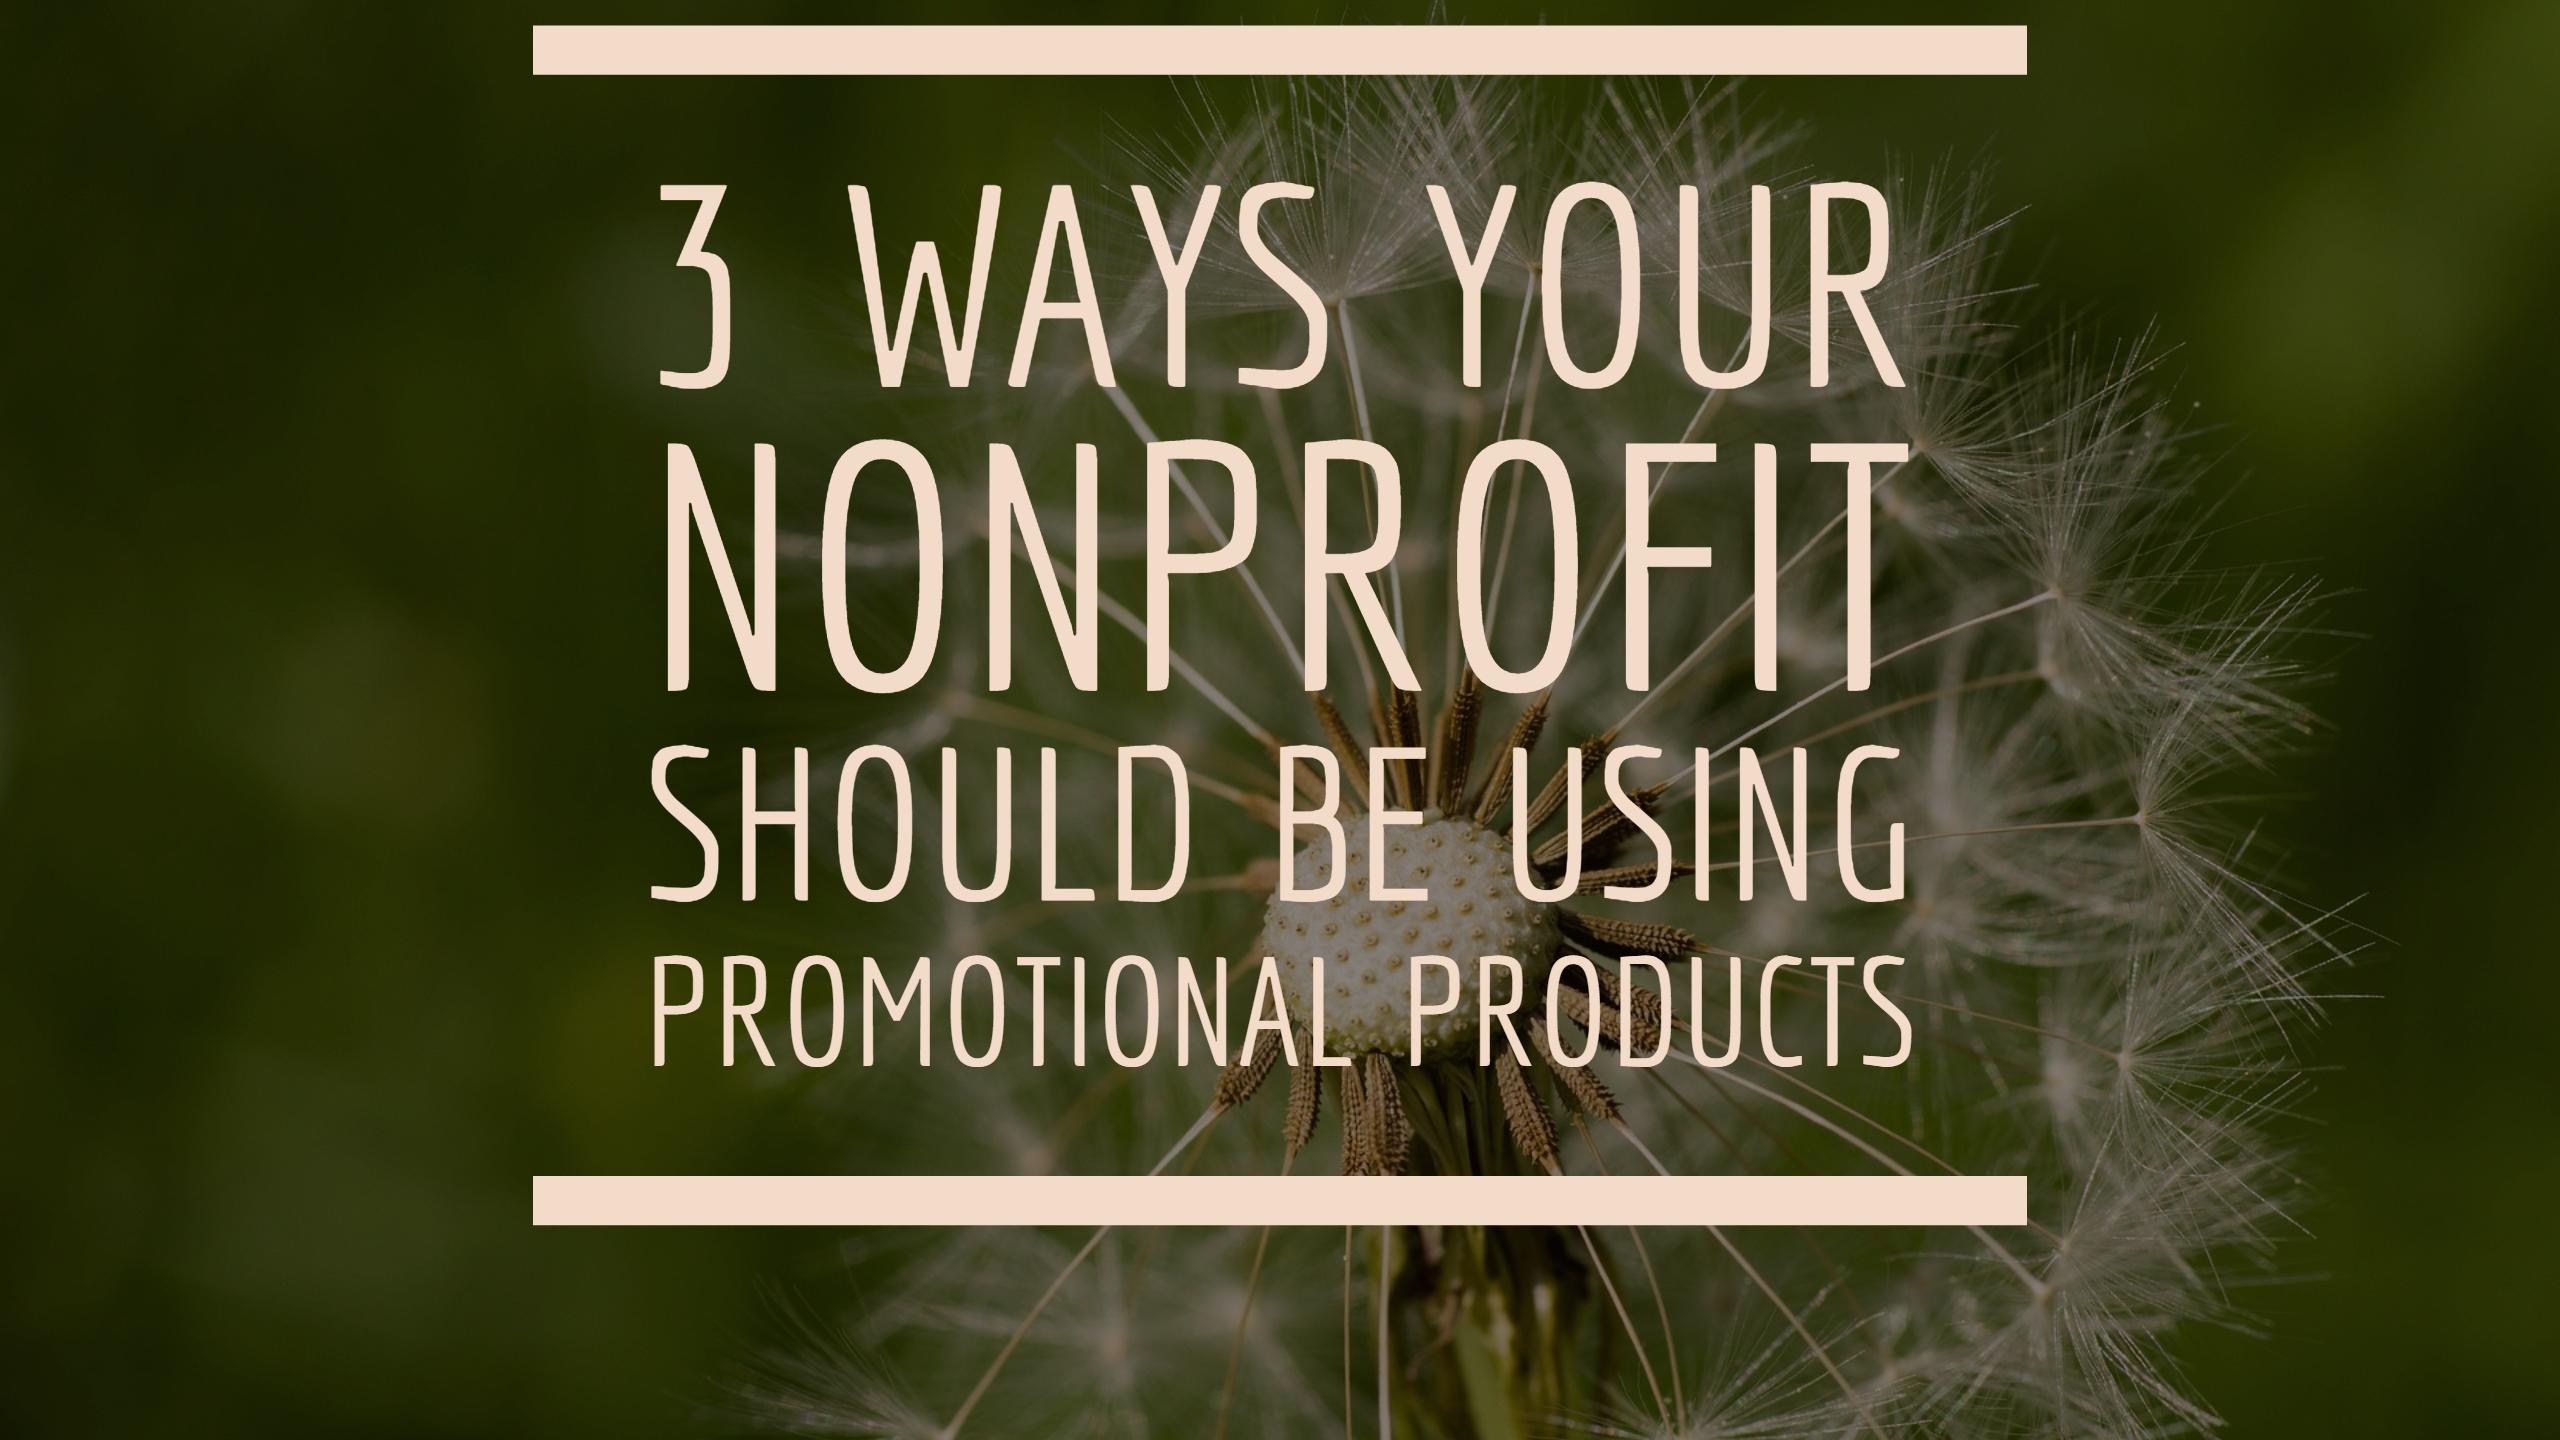 3 Ways Your Nonprofit Should Be Using Promotional Products